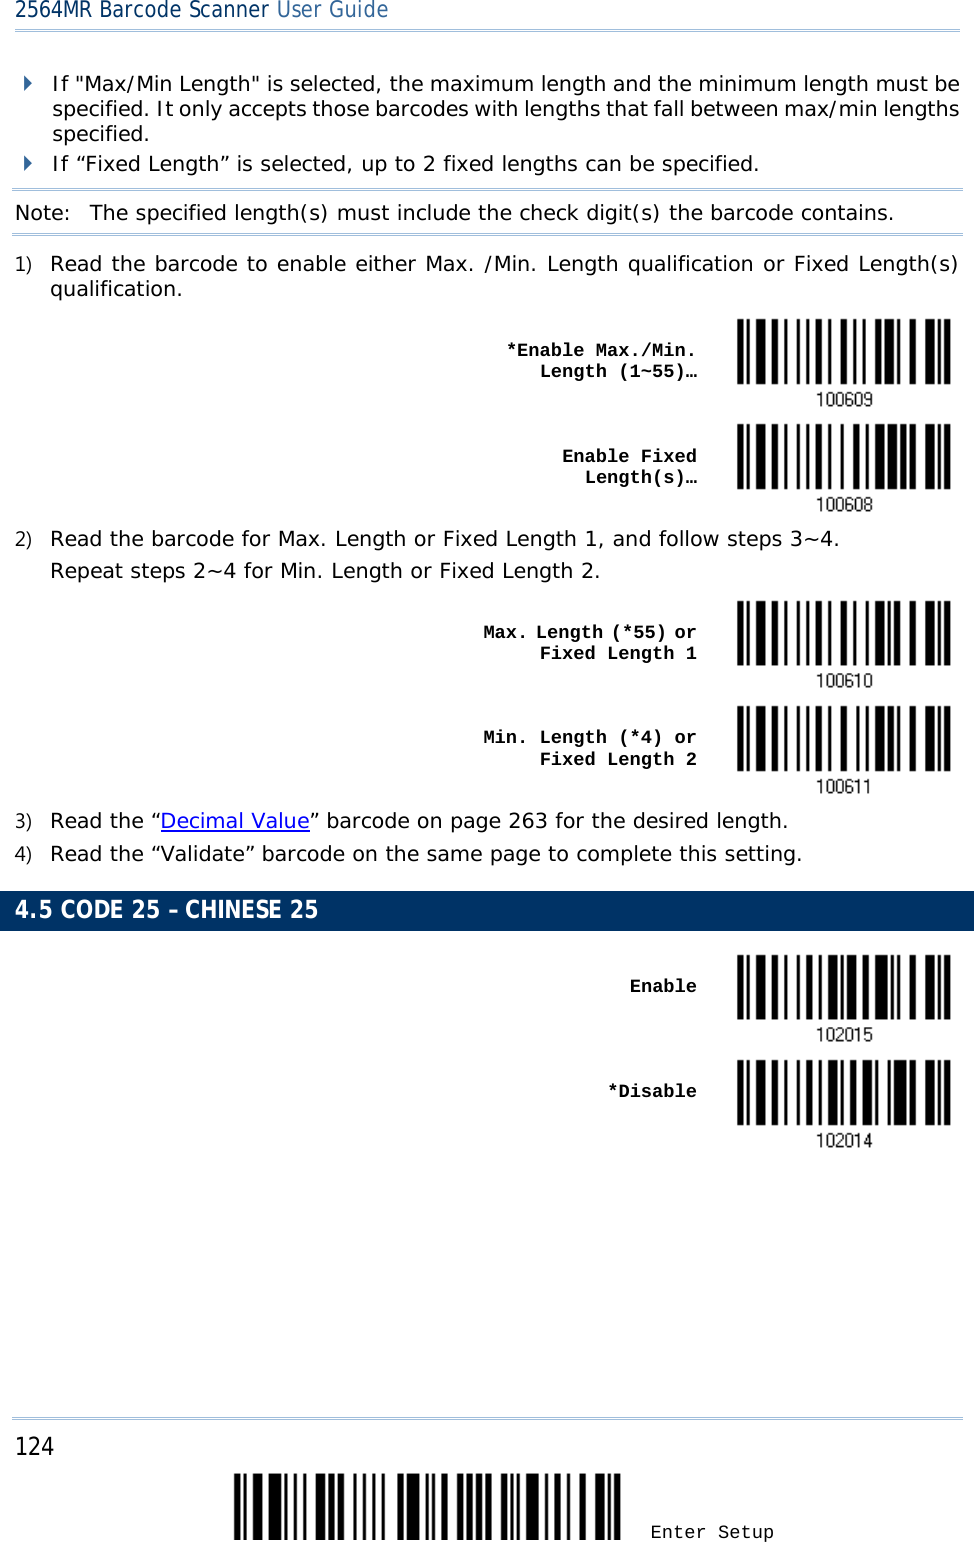 2564MR Barcode Scanner User Guide   If &quot;Max/Min Length&quot; is selected, the maximum length and the minimum length must be specified. It only accepts those barcodes with lengths that fall between max/min lengths specified.  If “Fixed Length” is selected, up to 2 fixed lengths can be specified. Note:   The specified length(s) must include the check digit(s) the barcode contains. 1) Read the barcode to enable either Max. /Min. Length qualification or Fixed Length(s) qualification.    *Enable Max./Min. Length (1~55)…     Enable Fixed Length(s)…  2) Read the barcode for Max. Length or Fixed Length 1, and follow steps 3~4. Repeat steps 2~4 for Min. Length or Fixed Length 2.    Max. Length (*55) or Fixed Length 1     Min. Length (*4) or Fixed Length 2  3) Read the “Decimal Value” barcode on page 263 for the desired length.  4) Read the “Validate” barcode on the same page to complete this setting. 4.5 CODE 25 – CHINESE 25    Enable     *Disable       124 Enter Setup 